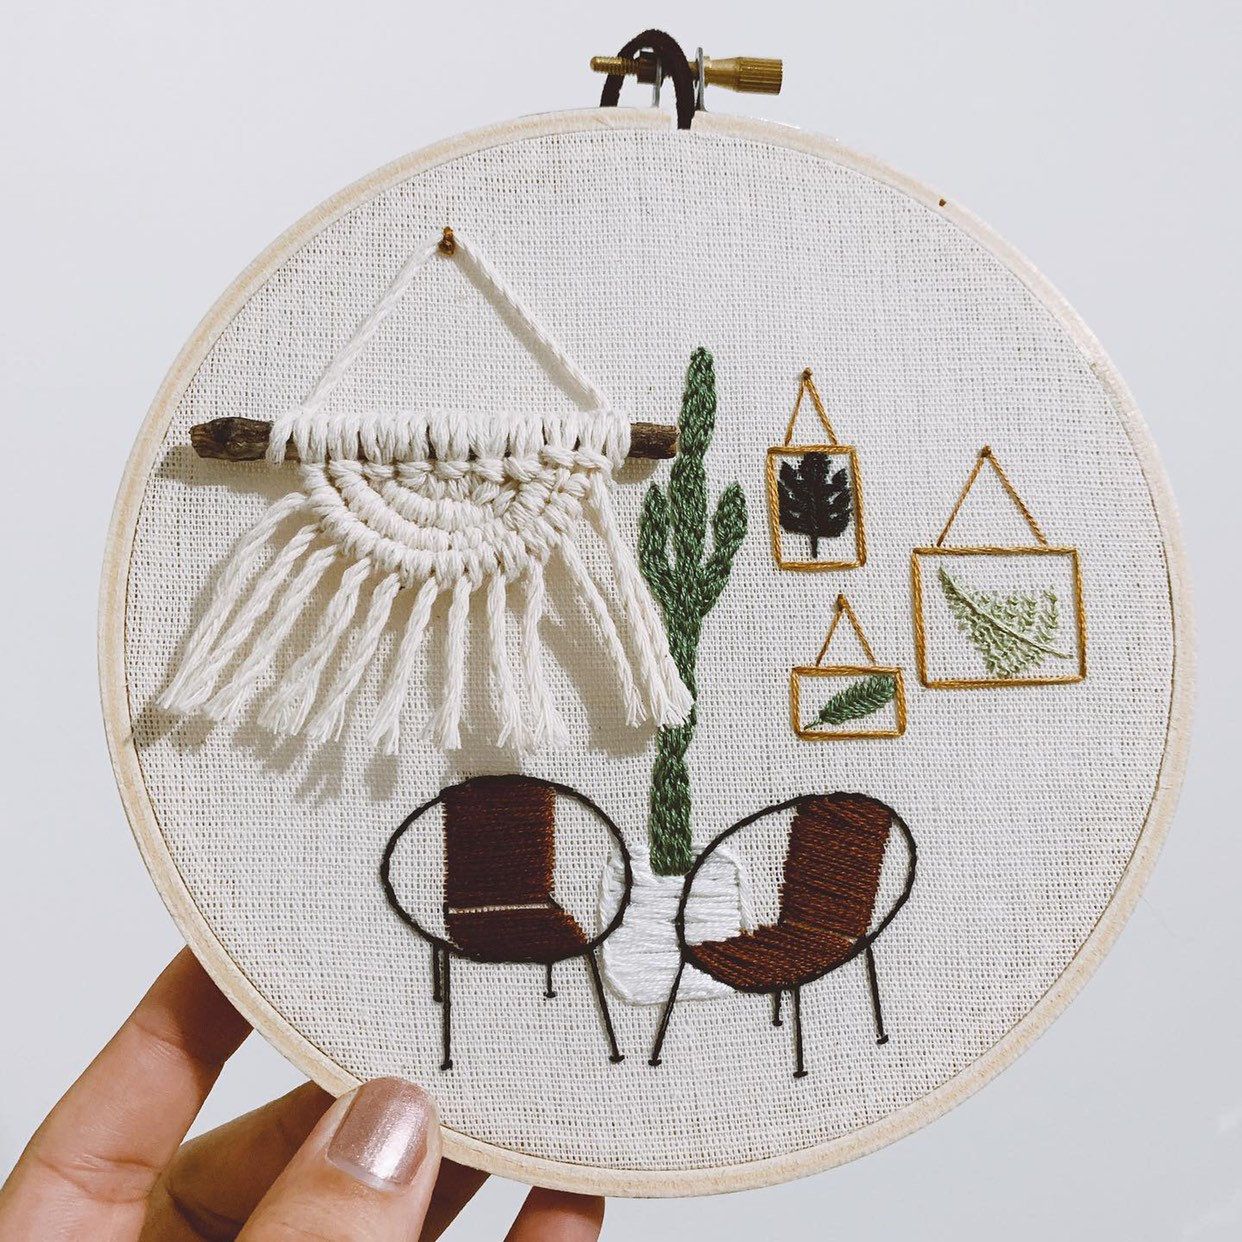 Home décor with needlework